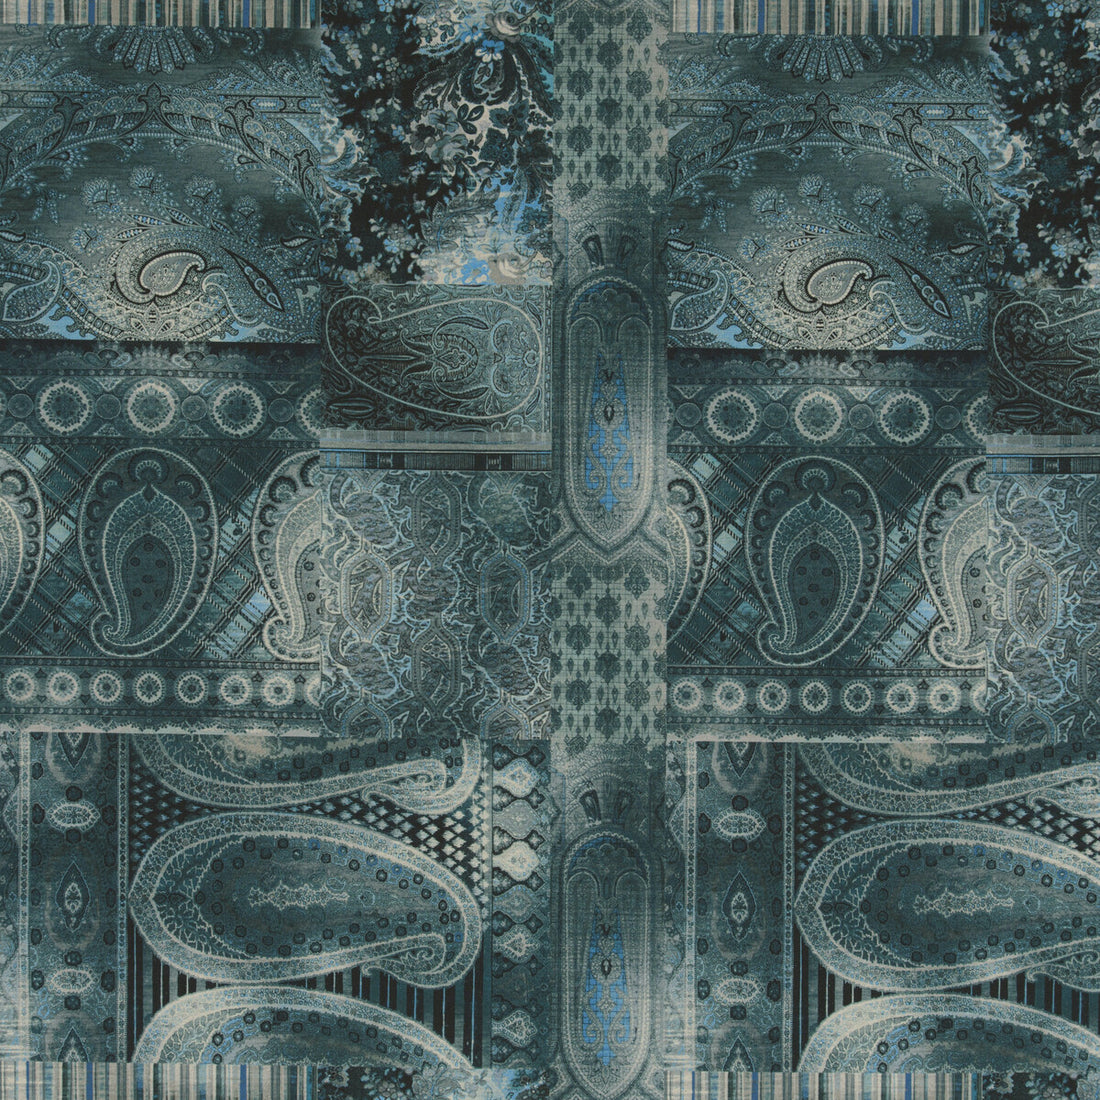 Lomond Linen fabric in teal color - pattern FD292.R11.0 - by Mulberry in the Festival collection